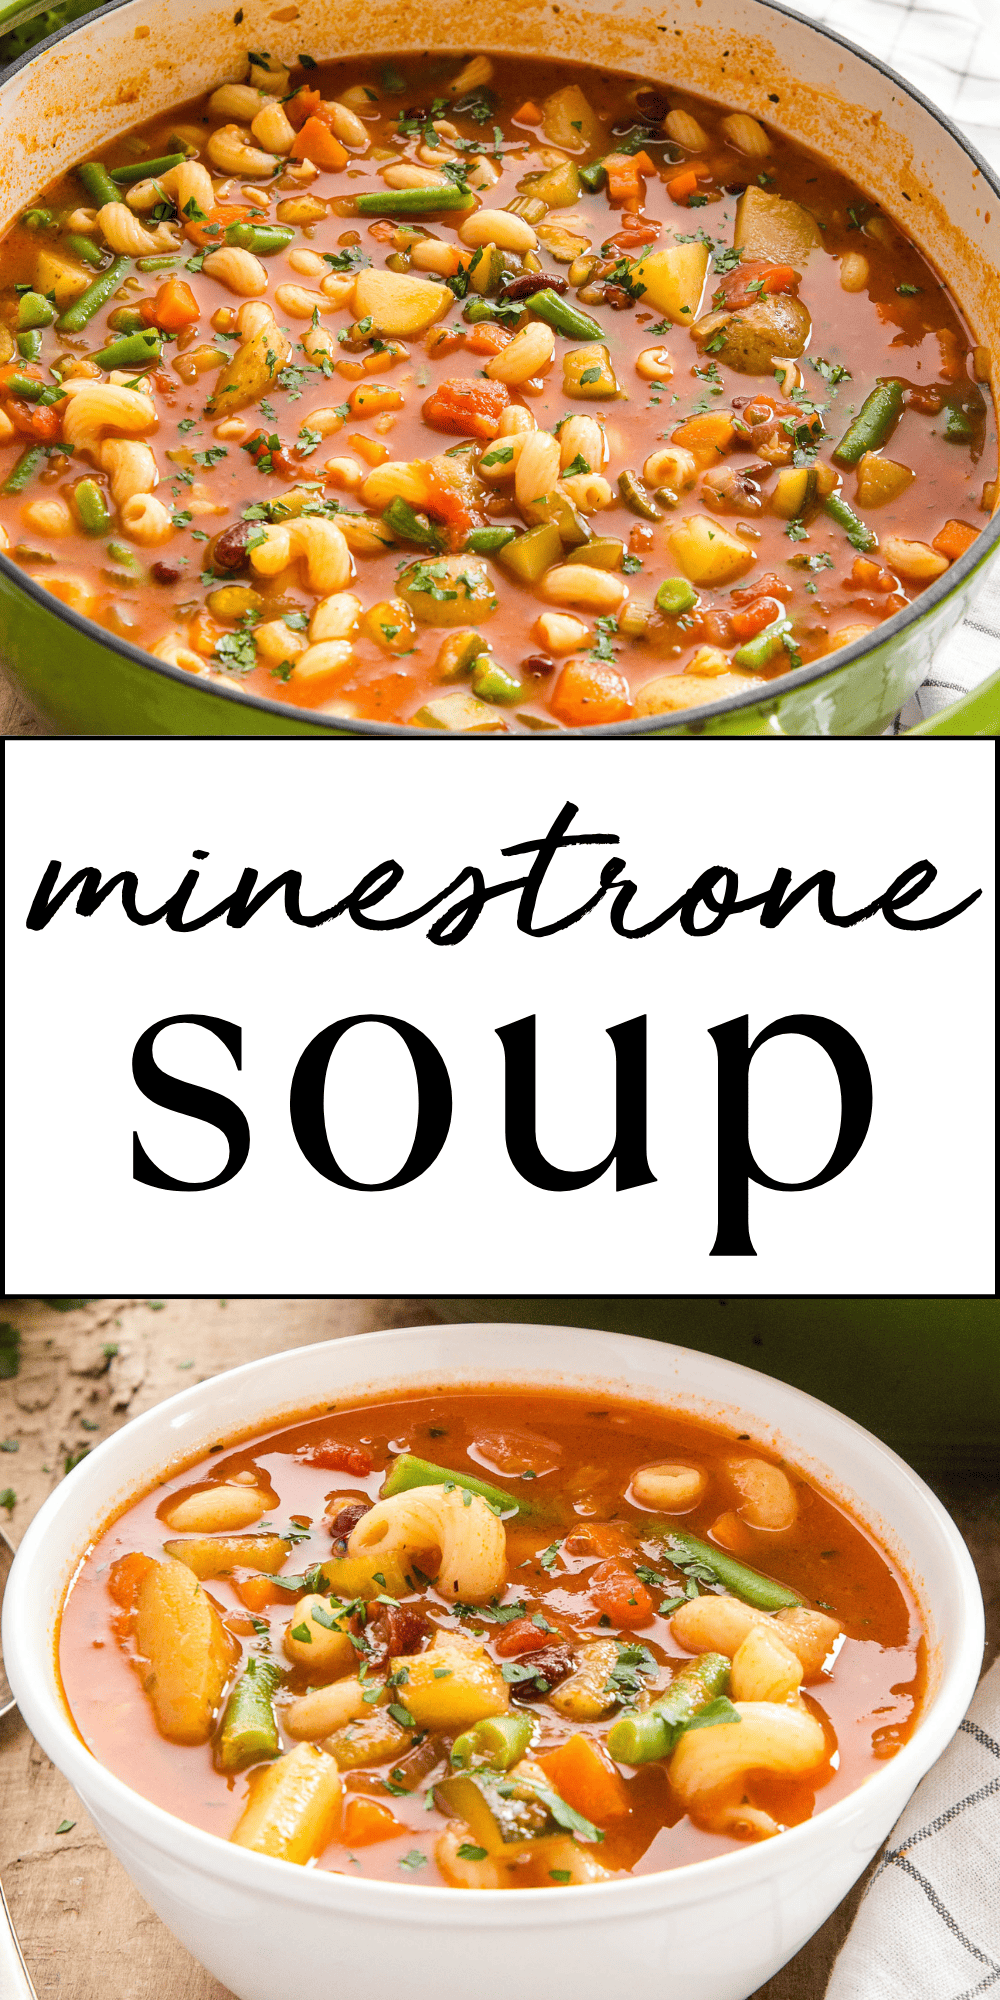 This Minestrone Soup recipe is an easy-to-make version of the classic Italian Minestrone - packed with vegetables, beans and pasta, it's a healthy and hearty meal that's on the table in 30 minutes! Recipe from thebusybaker.ca! #minestrone #minestronesoup #minestronesouprecipe #olivegarden #olivegardencopycat #easysoup #plantbased #healthysoup #healthymeal #30minutemeal #familymeal #weeknightmeal via @busybakerblog